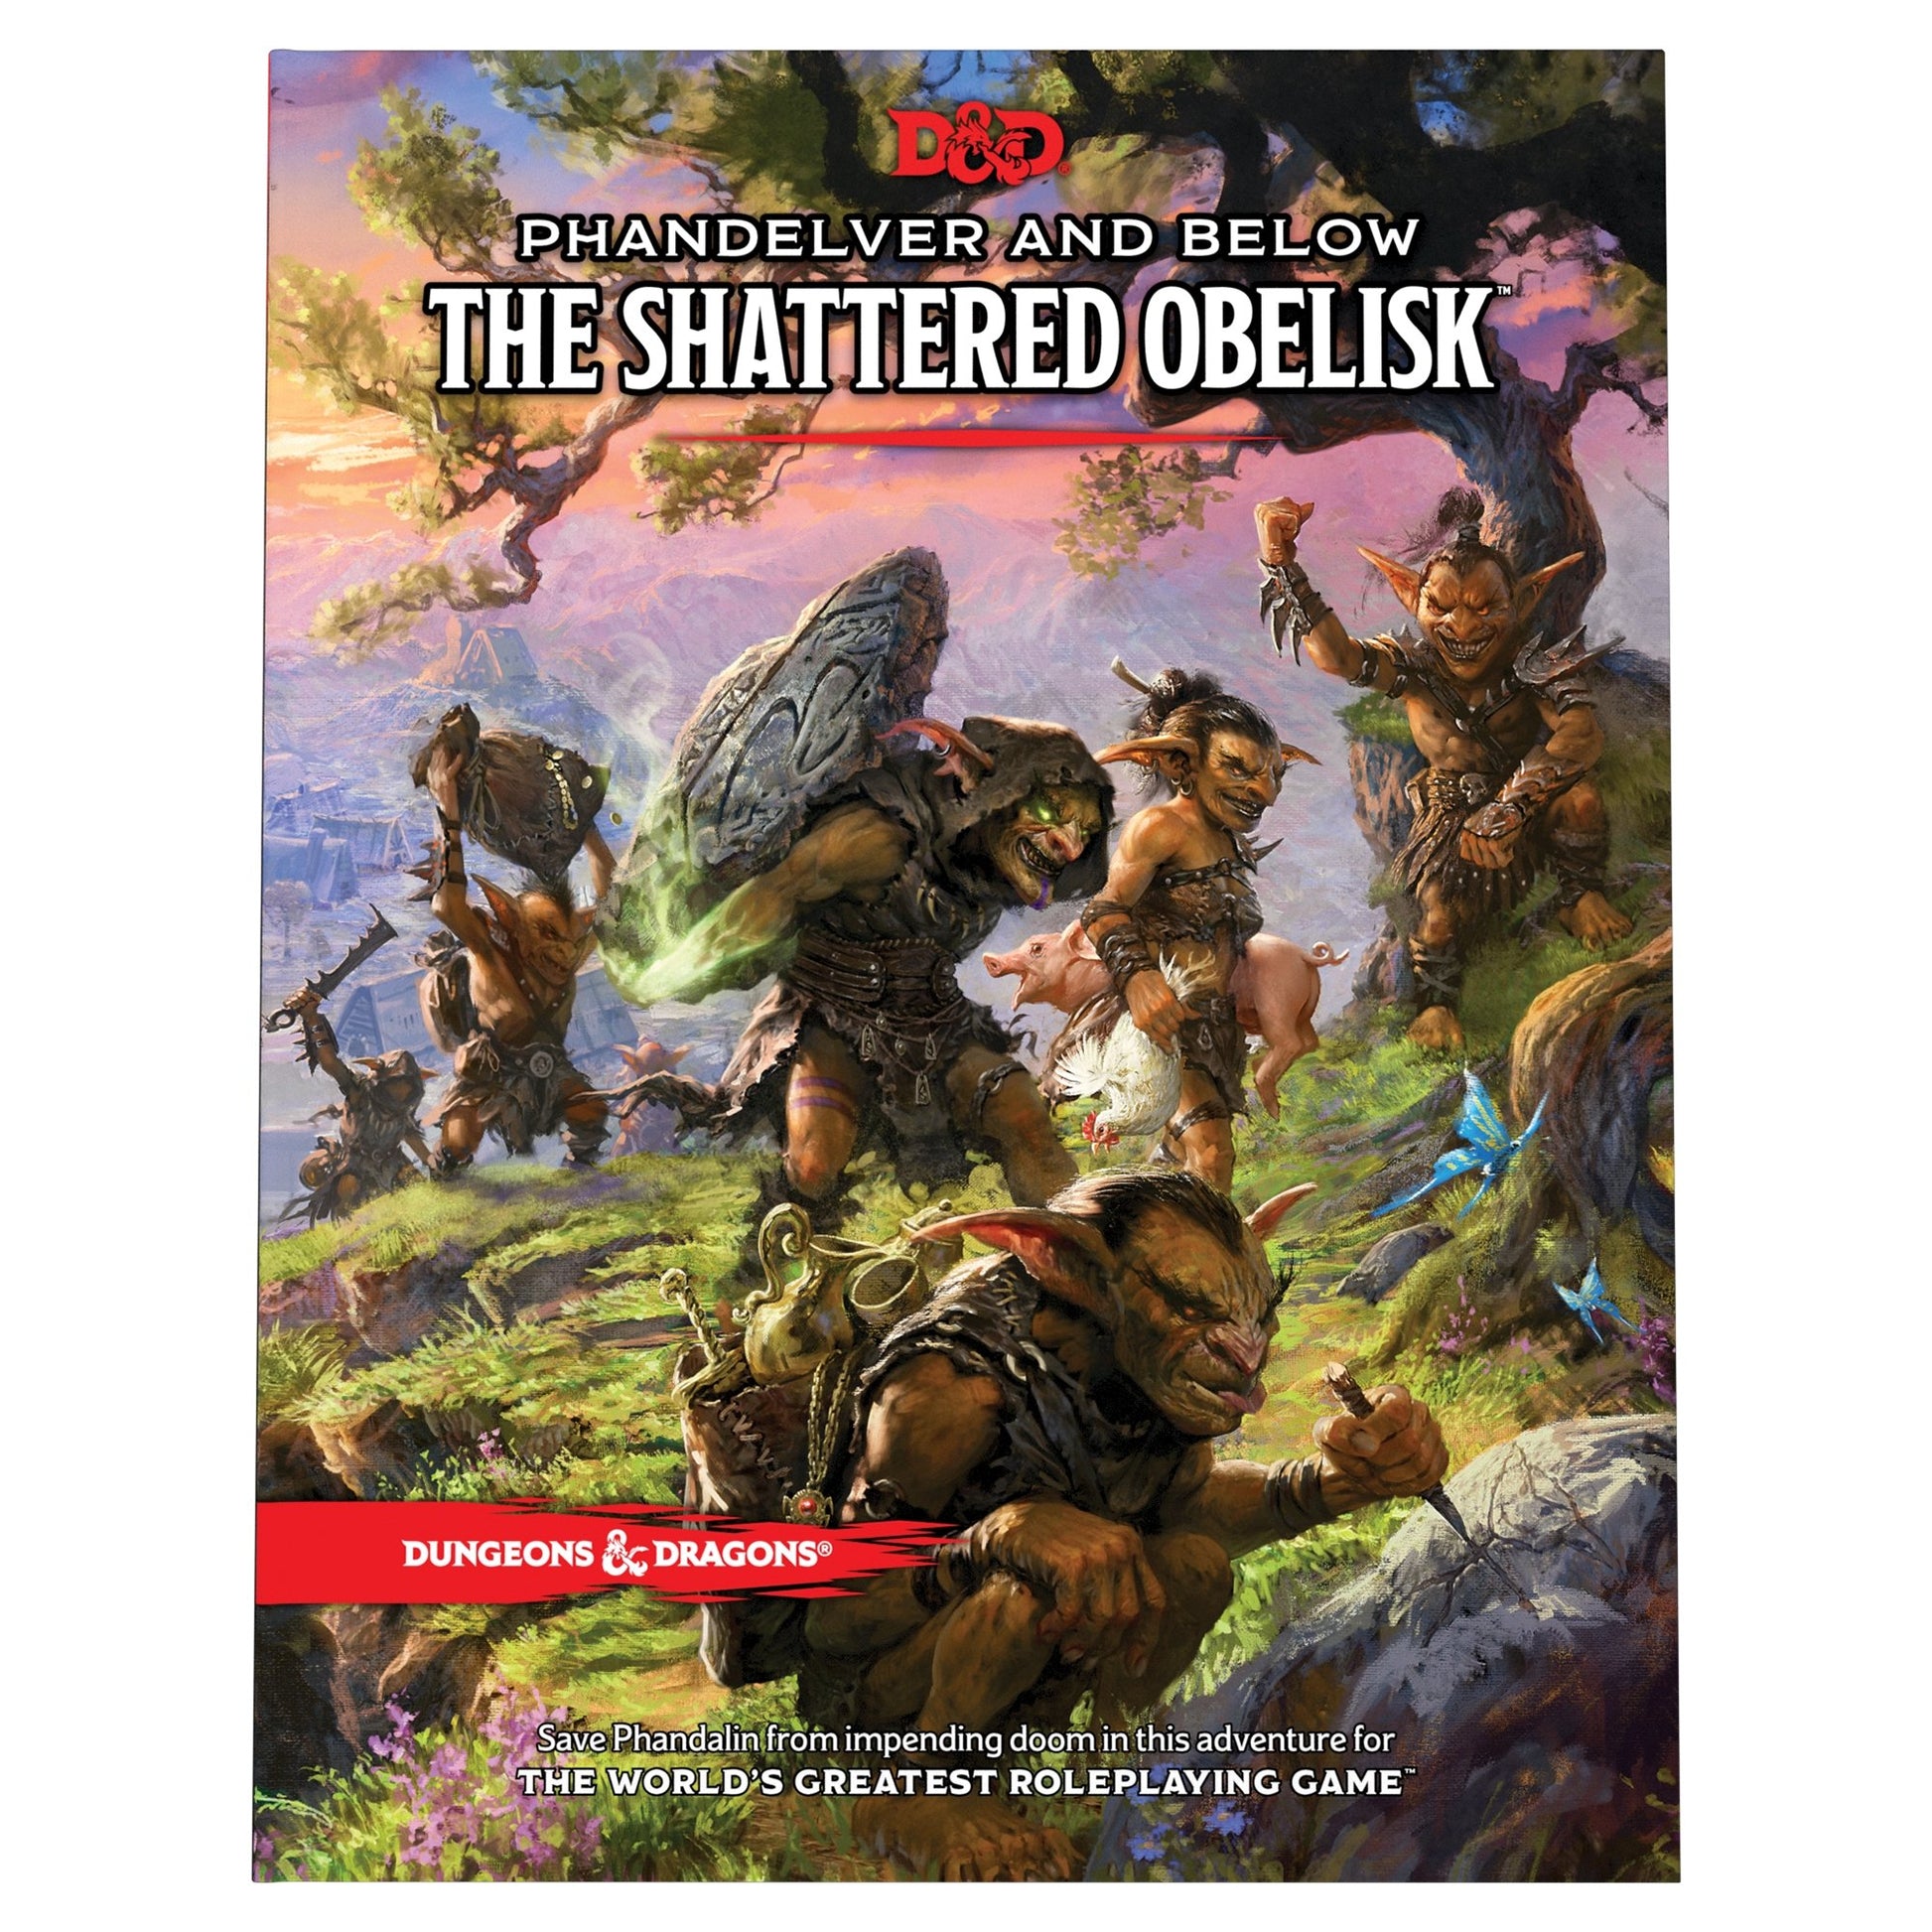 Dungeons & Dragons RPG: Phandelver And Below - The Shattered Obelisk from WIZARDS OF THE COAST, INC at The Compleat Strategist